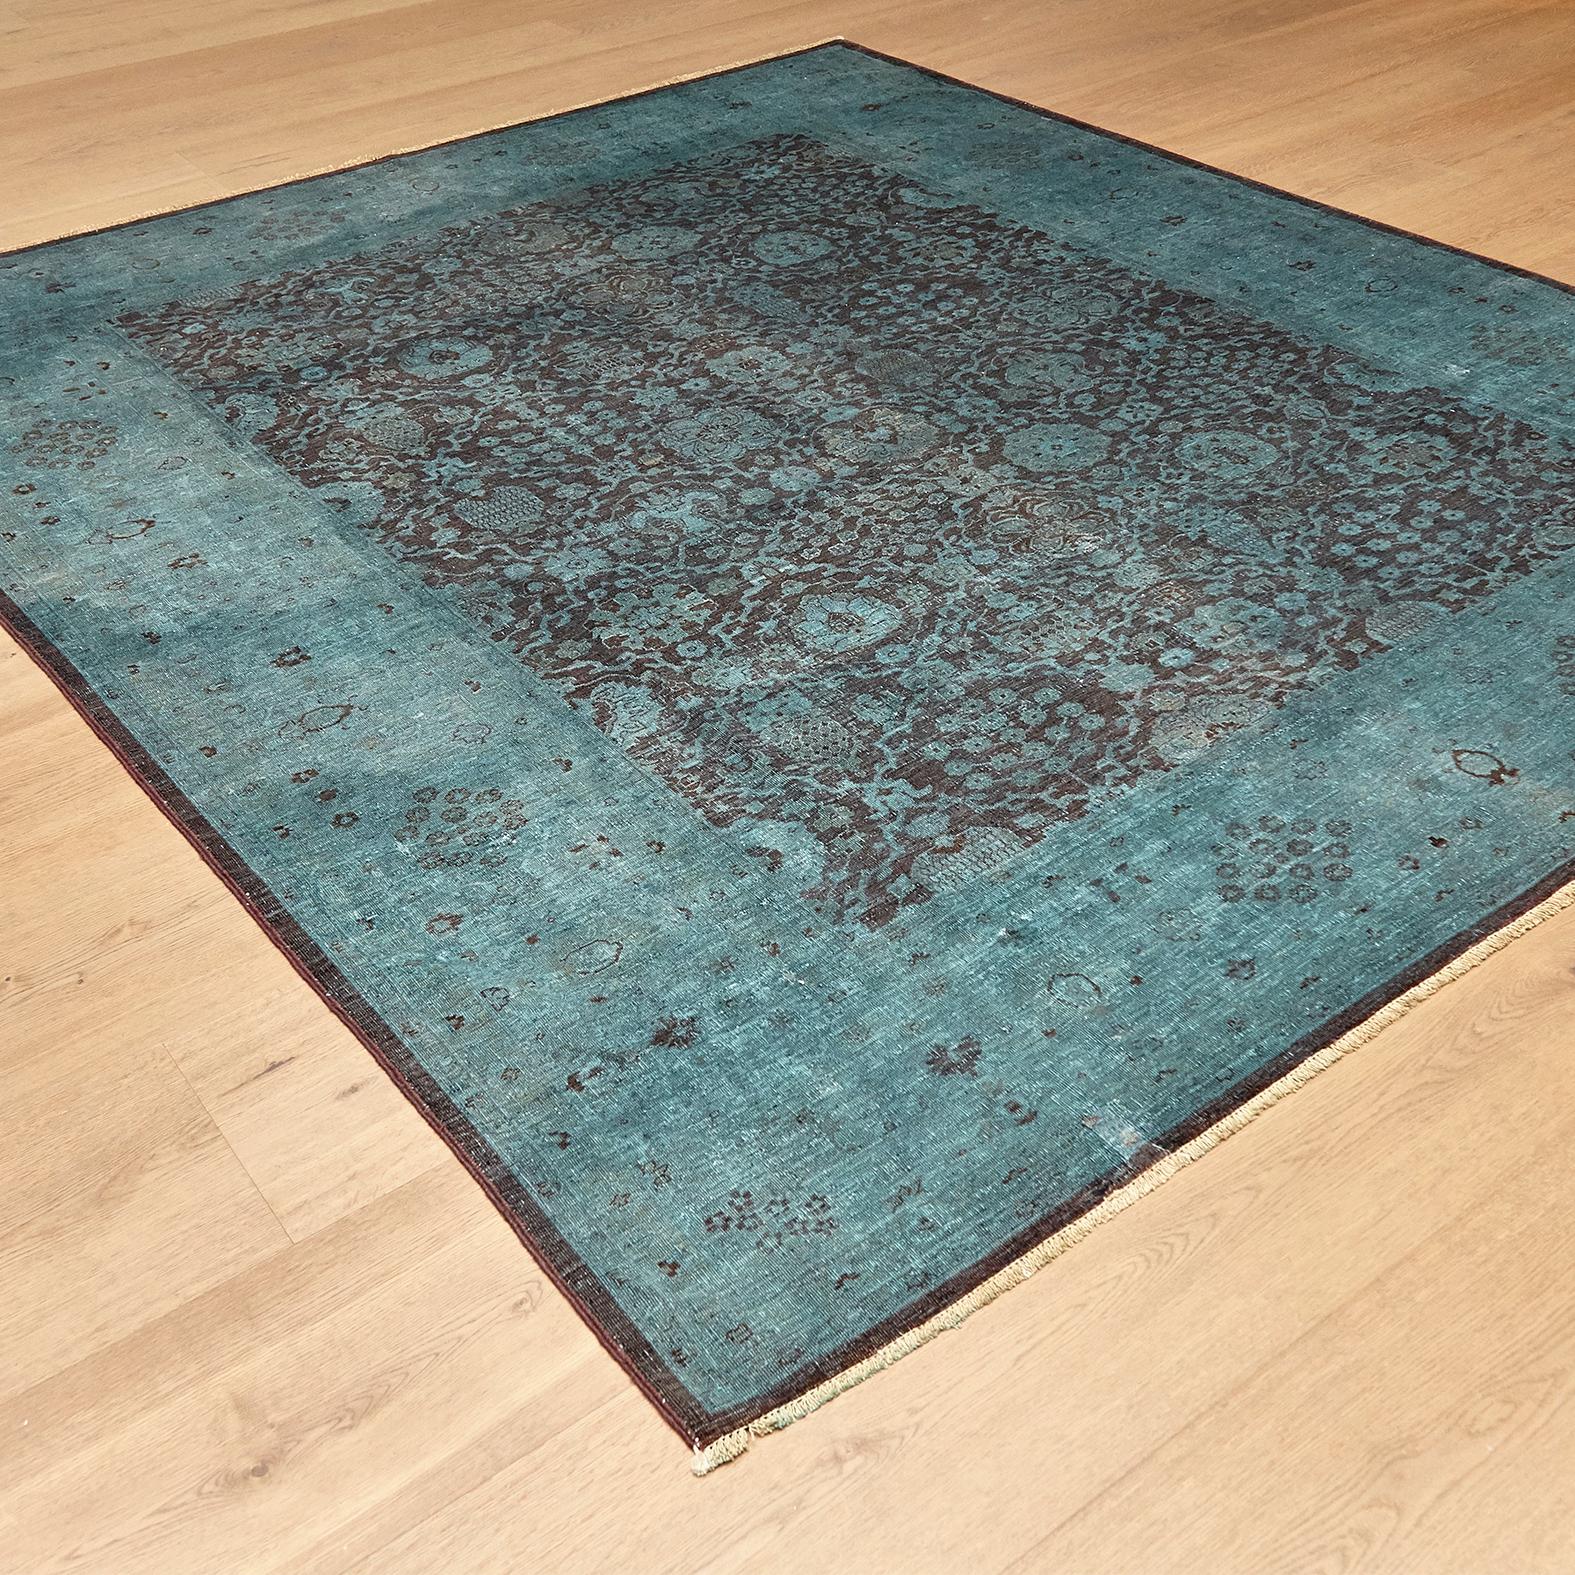 Ziegler large rug made in Pakistan, circa 2000.

Hand knotted.
Stone washed

Measures: 248 x 296

70965.